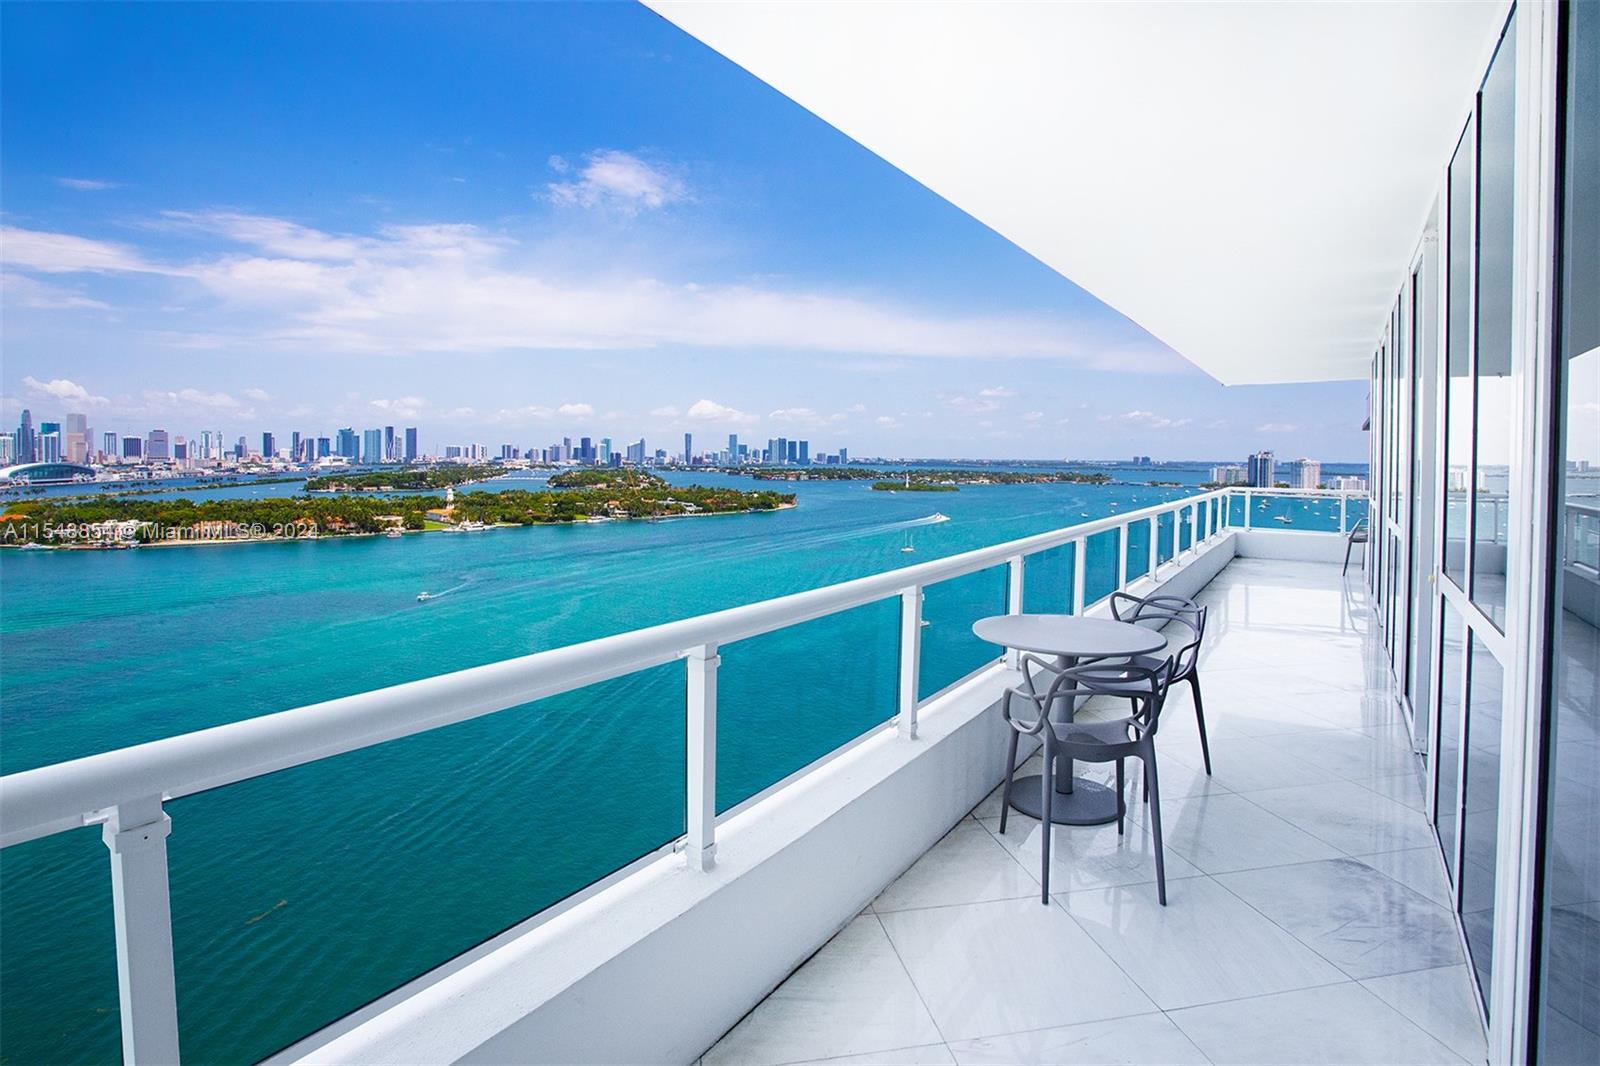 Seasonal Rental. Modern elegance meets panoramic views in this Miami Beach gem! This 2 bed/3 bath + den unit boasts the best view in Miami, with a huge balcony to soak it all in. Furnished with amazing furniture, it's the perfect blend of style and comfort. The unit is completely updated. Don't miss out on this incredible opportunity! Contact us today. Short term lease 3 month minimum.